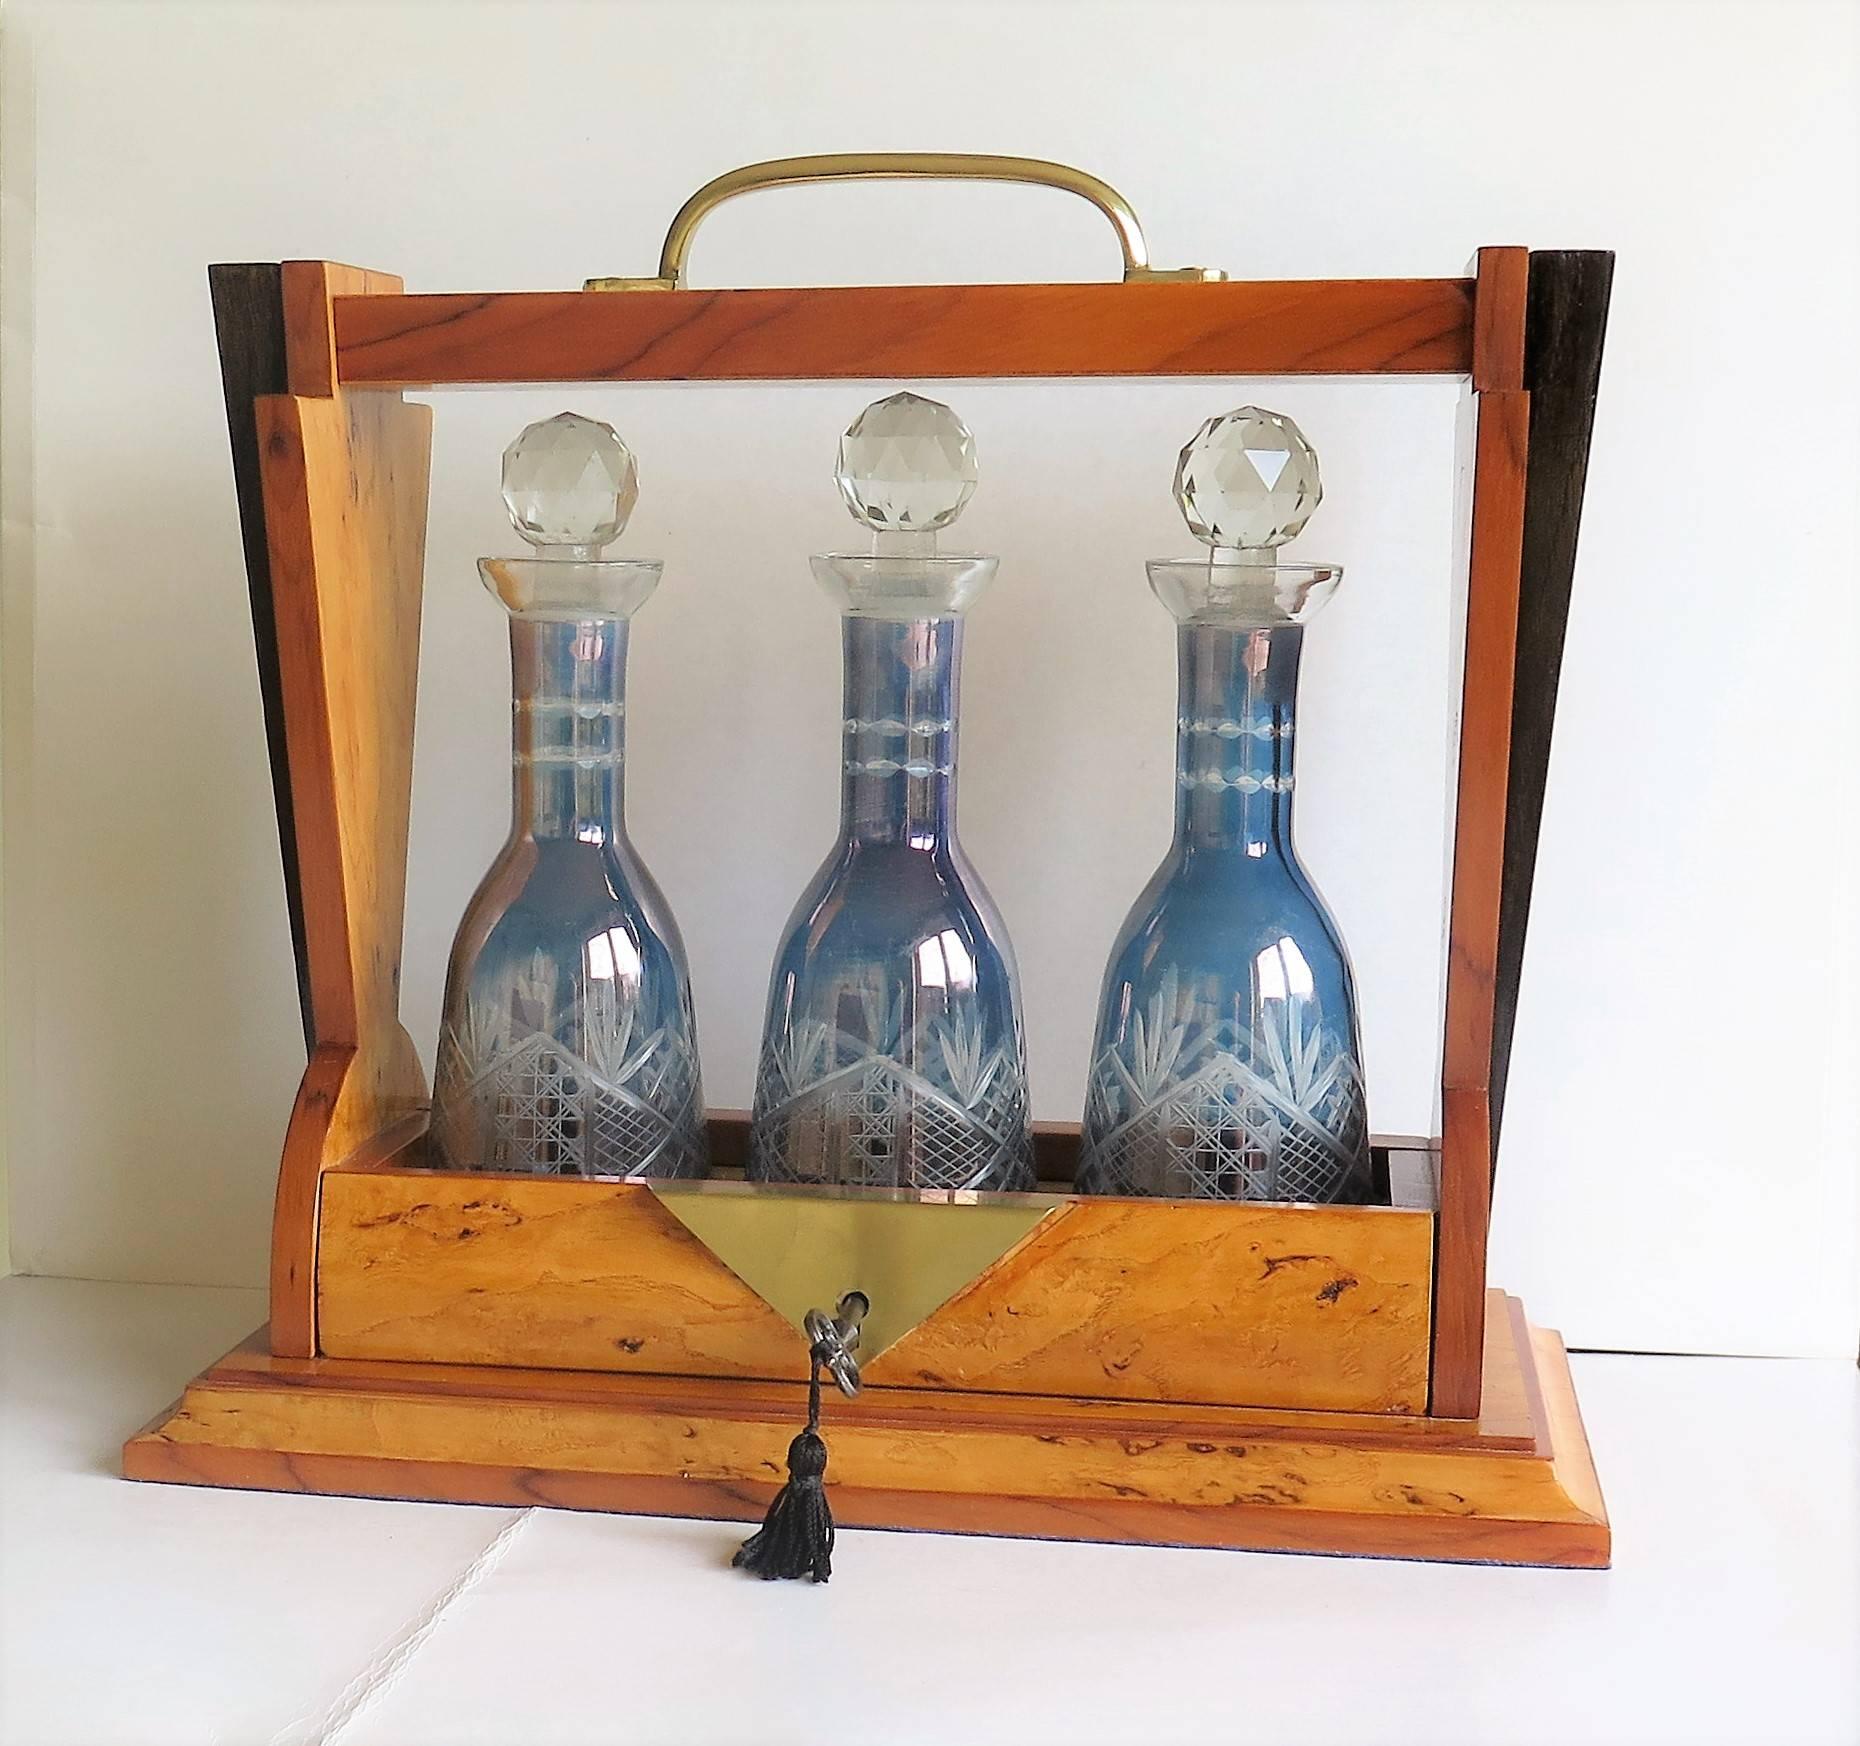 This is a beautiful Tantalus with THREE blue glass engraved decanters from the Art Deco period, probably made in France.

The Tantalus frame is beautifully designed and made, in the geometric shape and lines which so epitomises the Art Deco period.